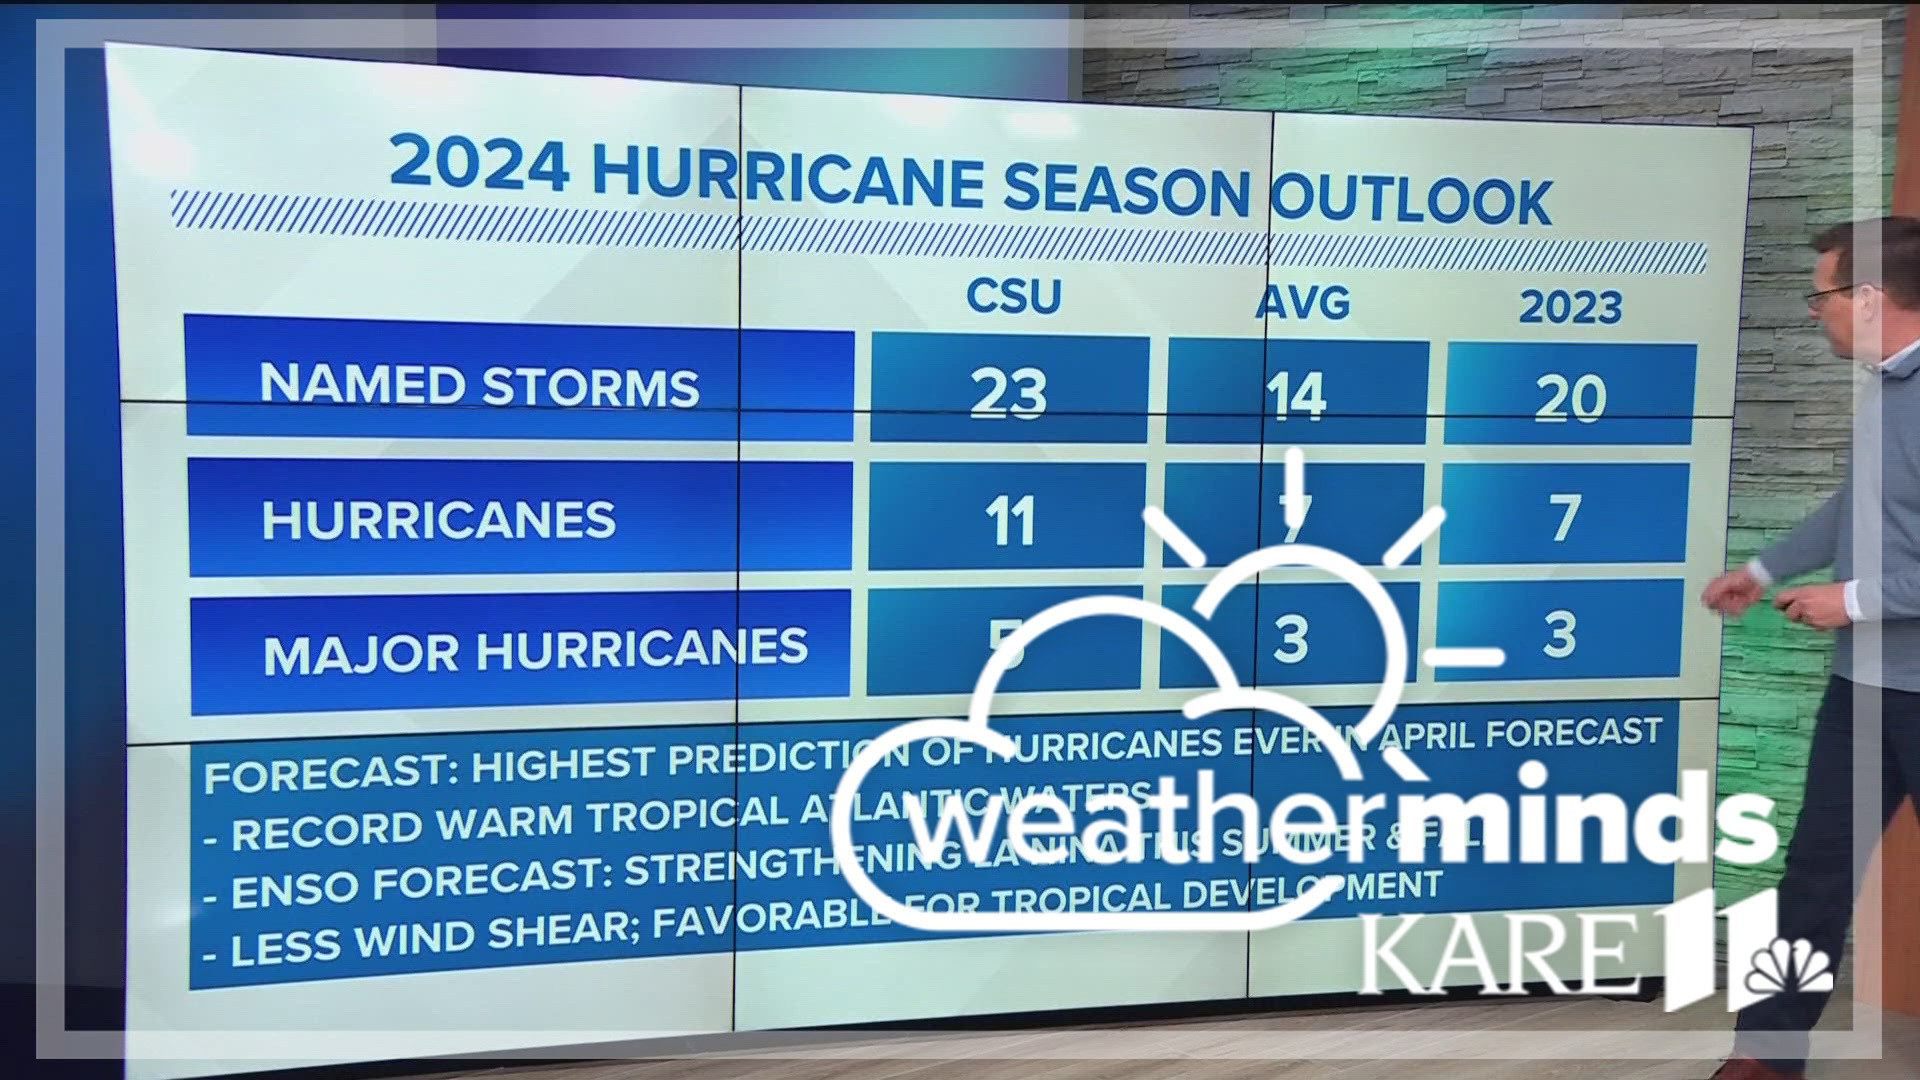 KARE 11's Jamie Kagol compares this year's forecast to previous years.